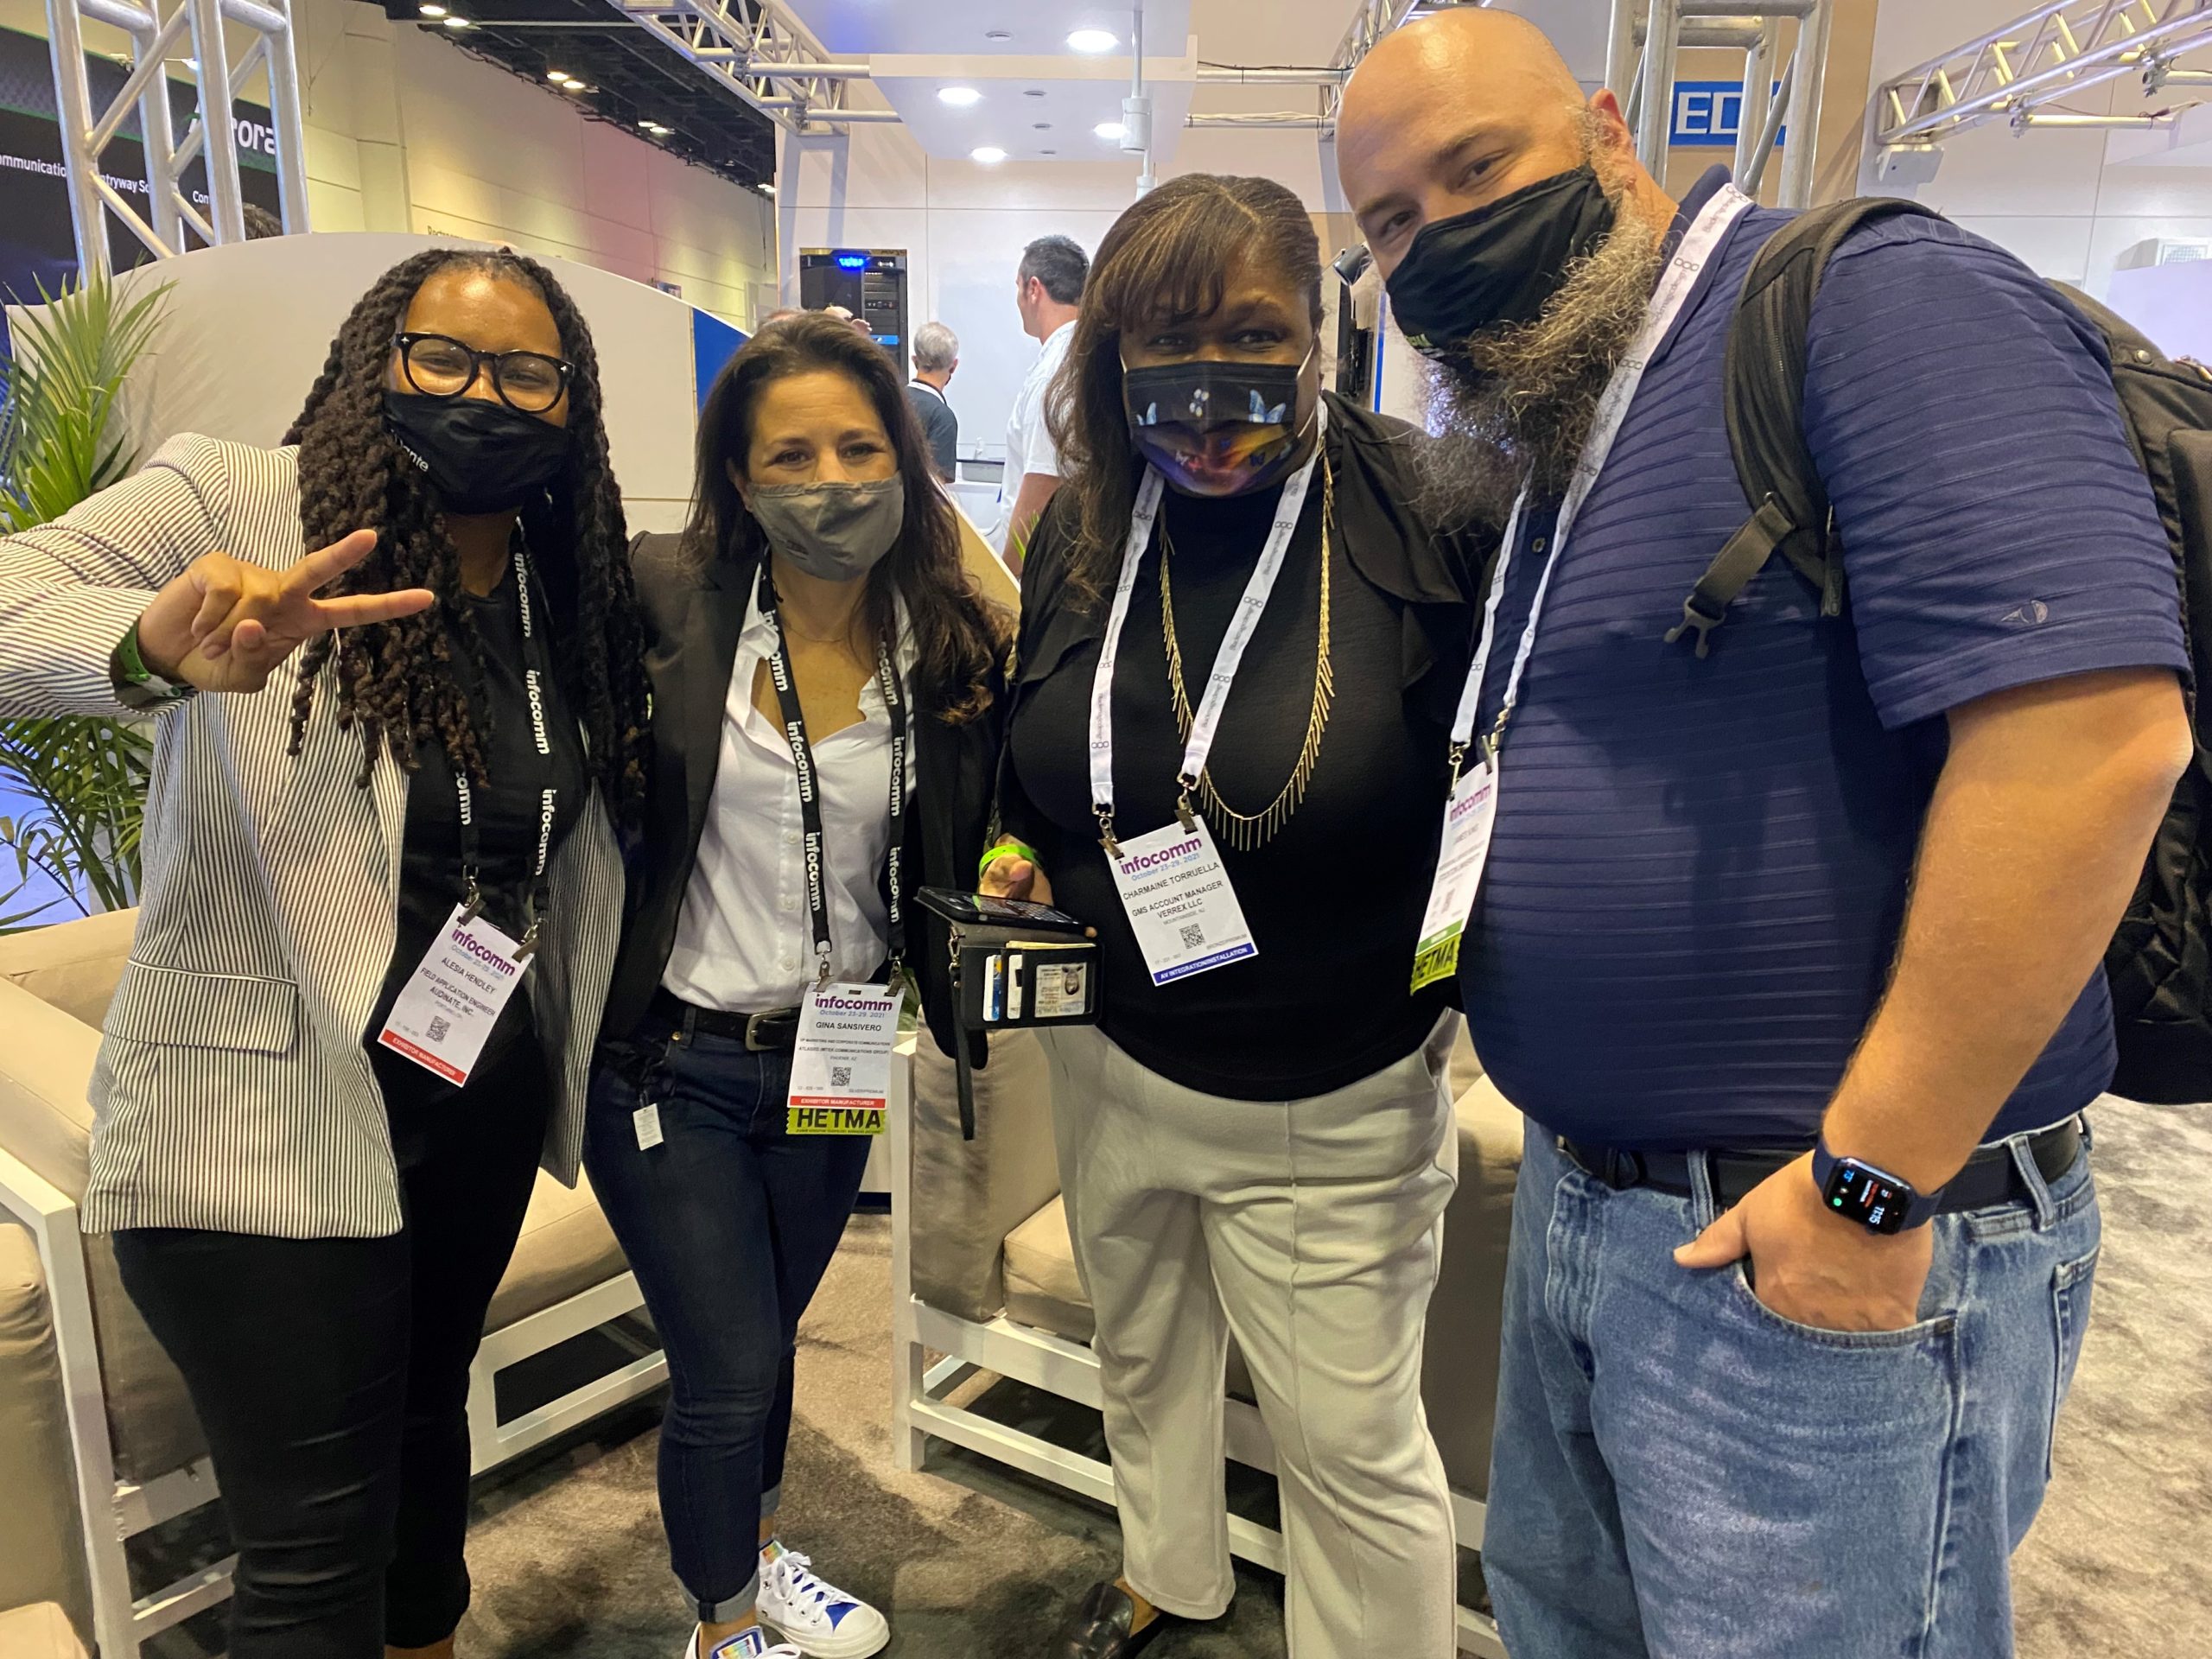 Alesia Hendley, Gina Sansivero, Charmaine Torruella and James King in the AtlasIED booth at InfoComm 2021